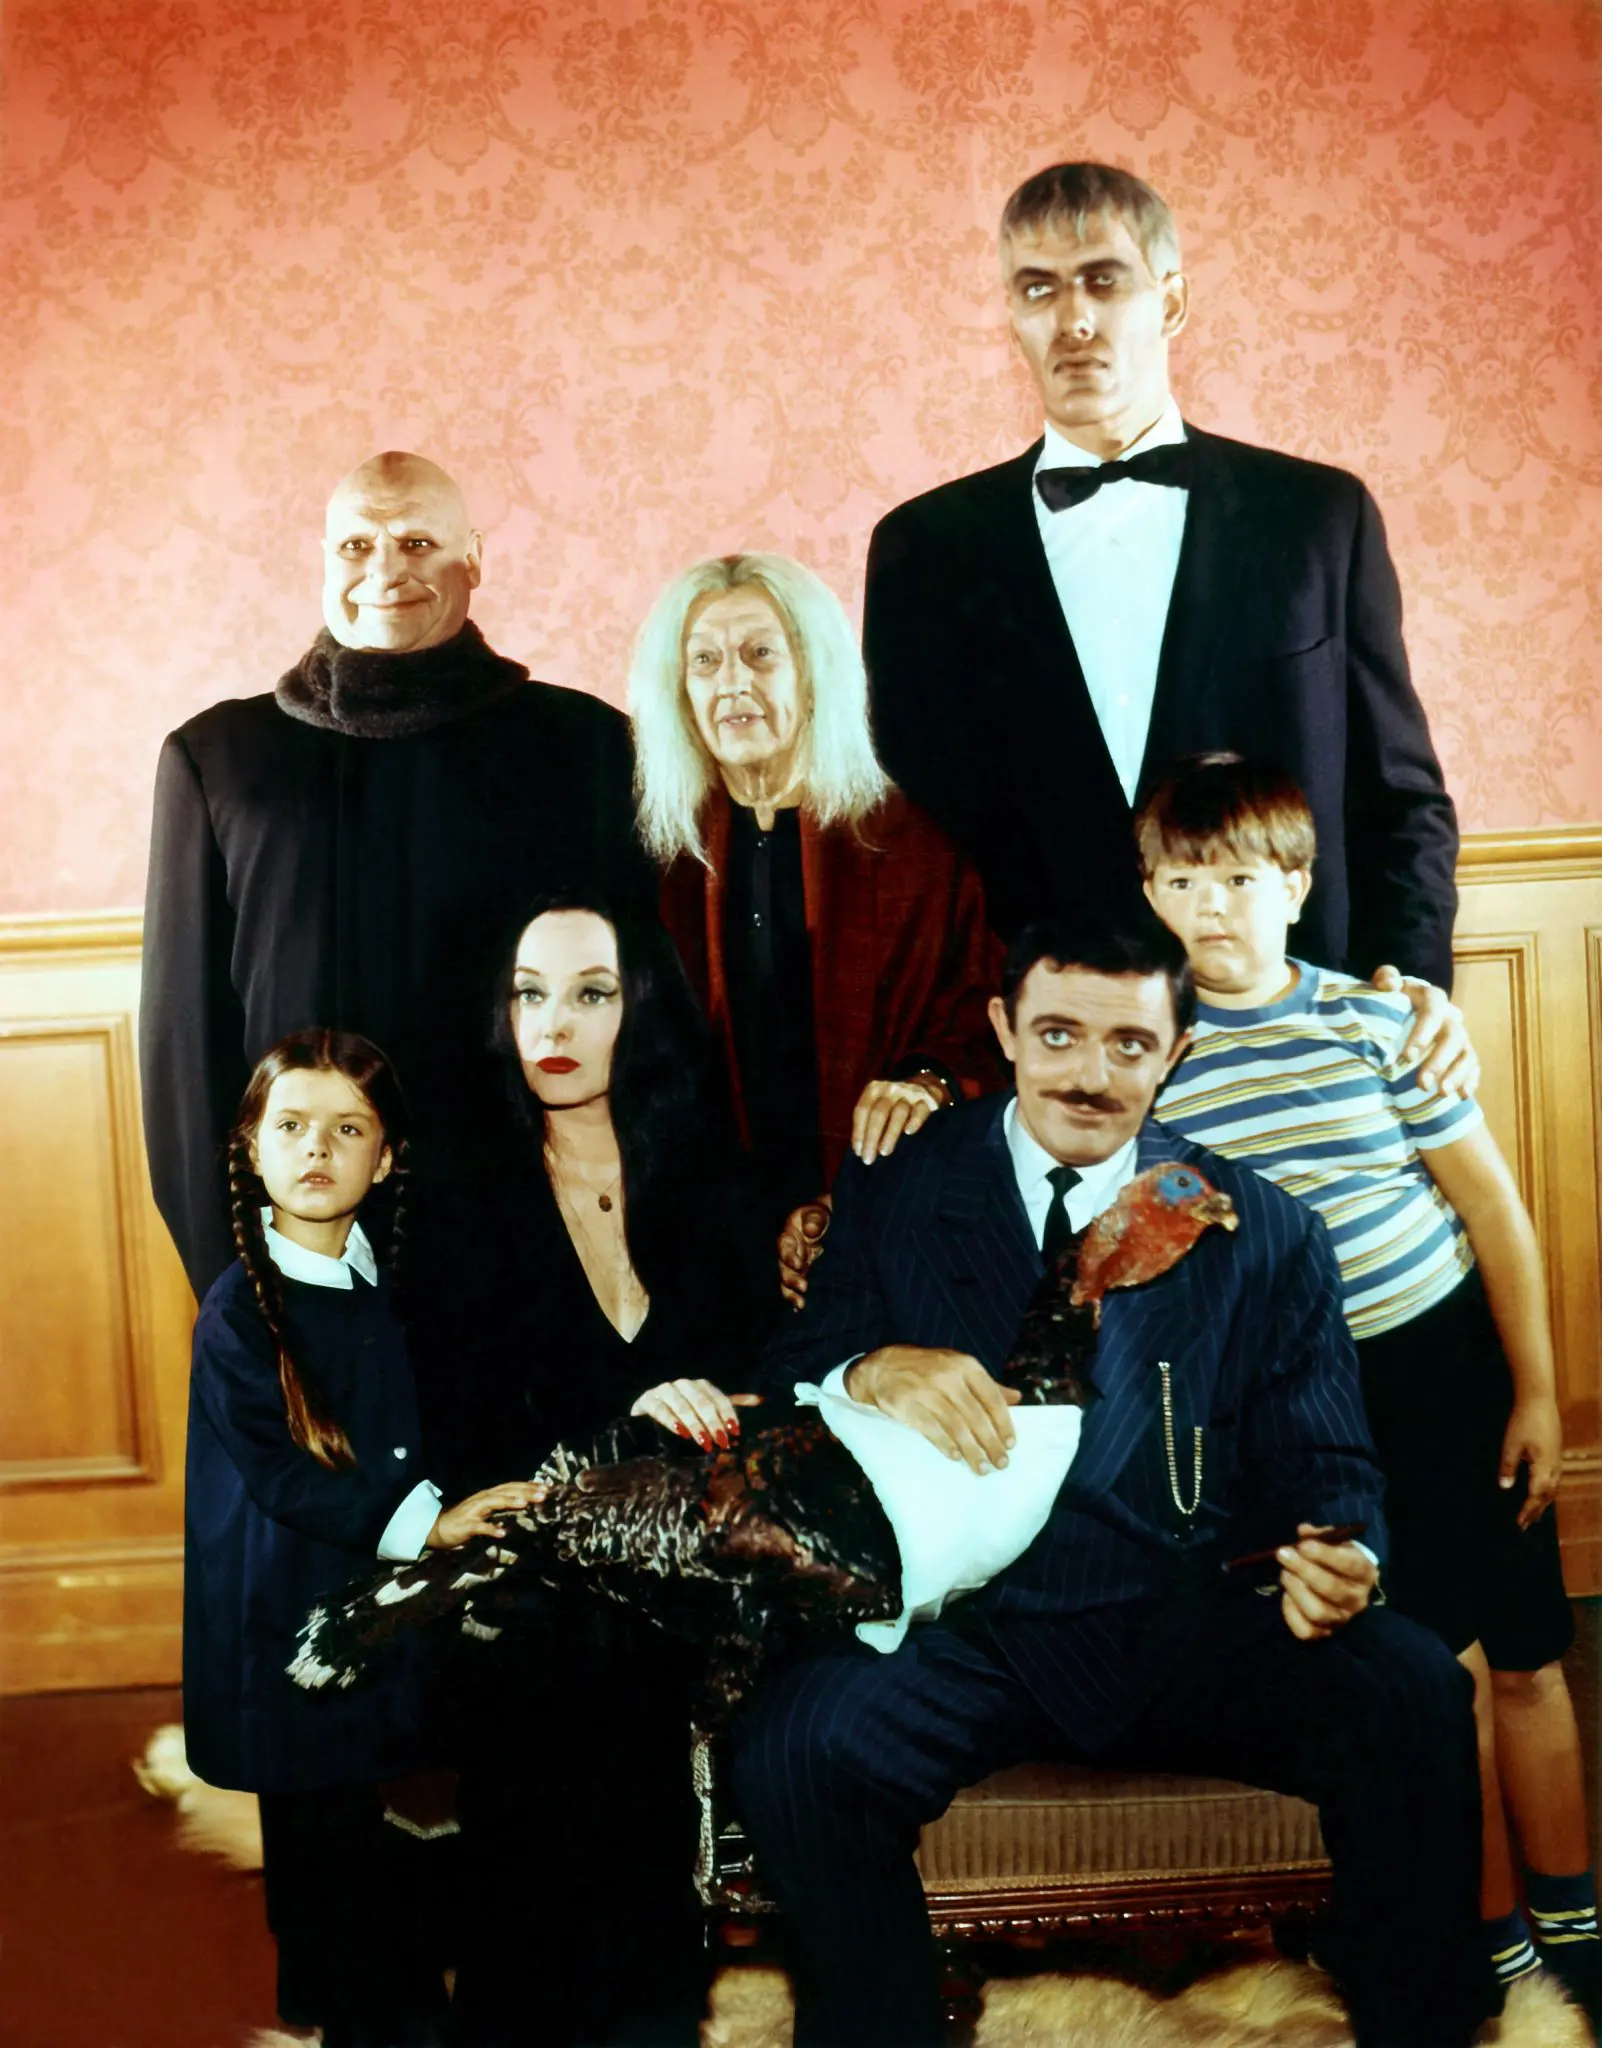 download addams family 2 wednesday